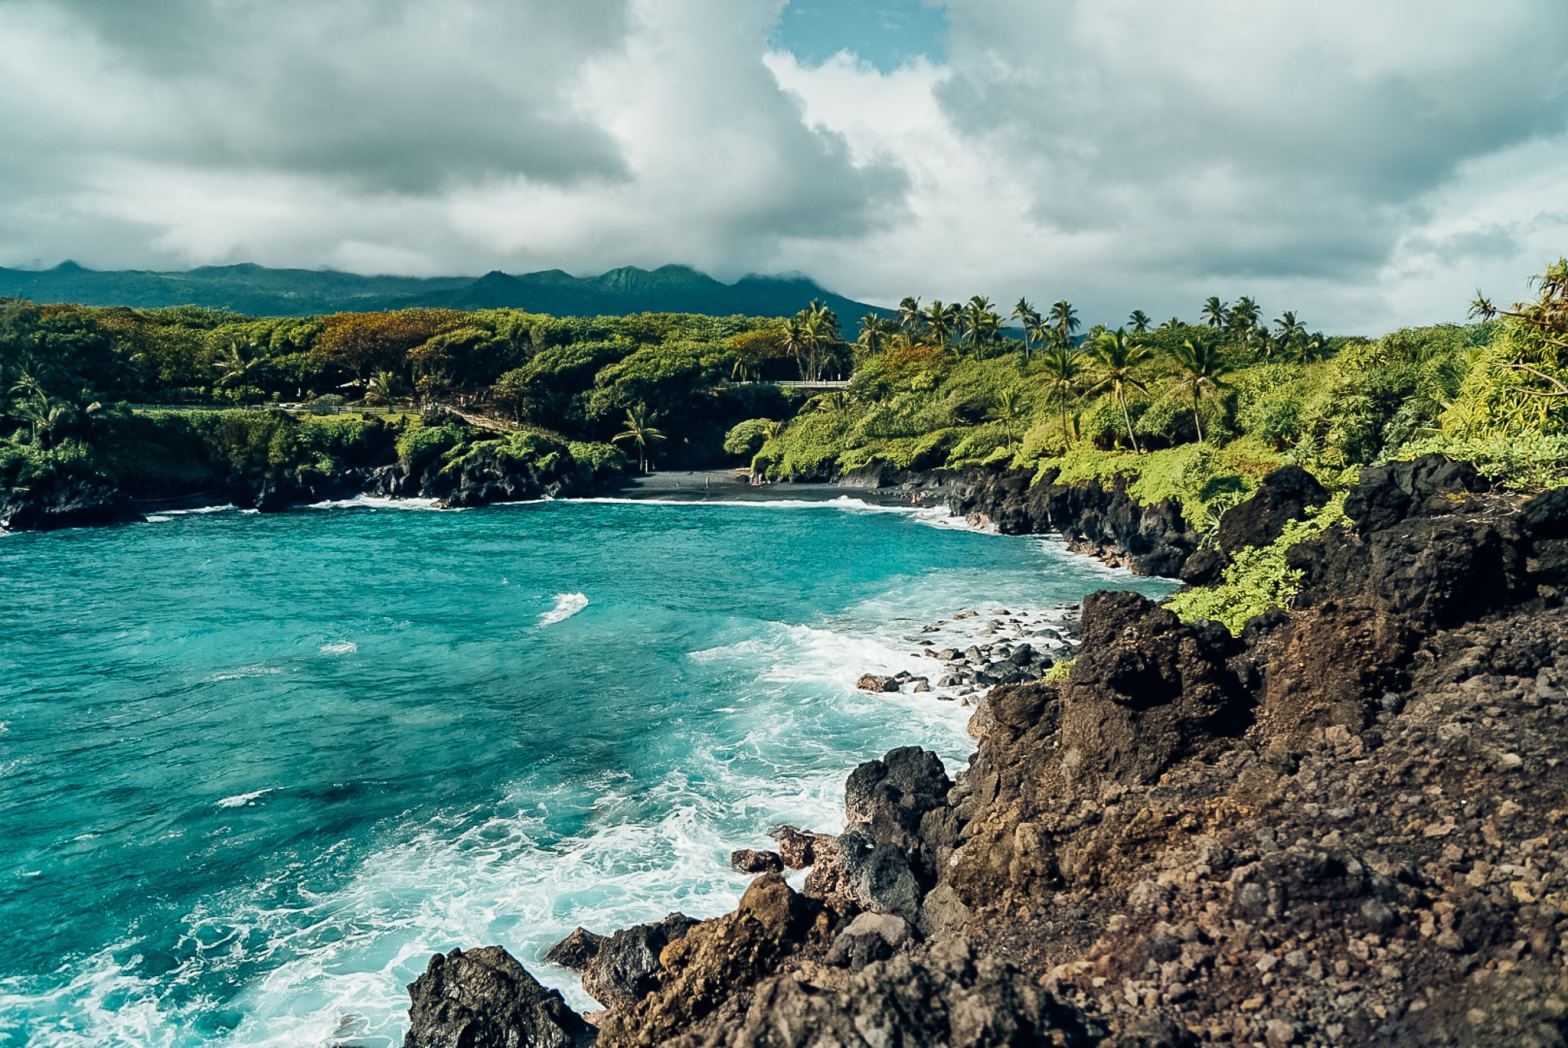 Black sand beach around a cove of sea water with palm trees, black lava rock, and mountains in the background